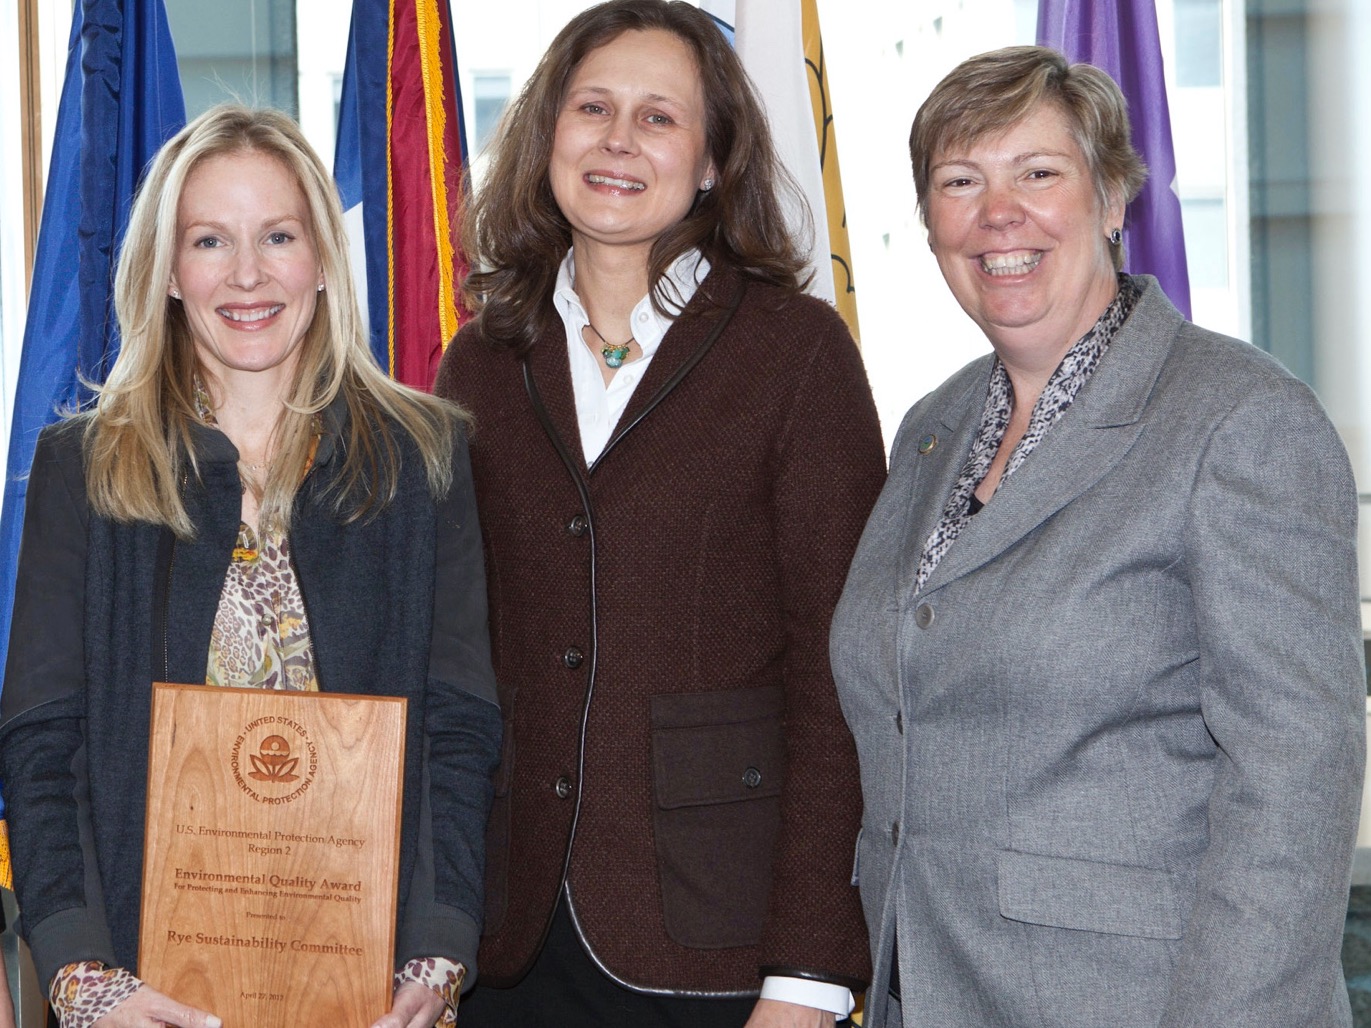 Our group's lobbying for change efforts culminated in a plastic bag law and EPA Award.